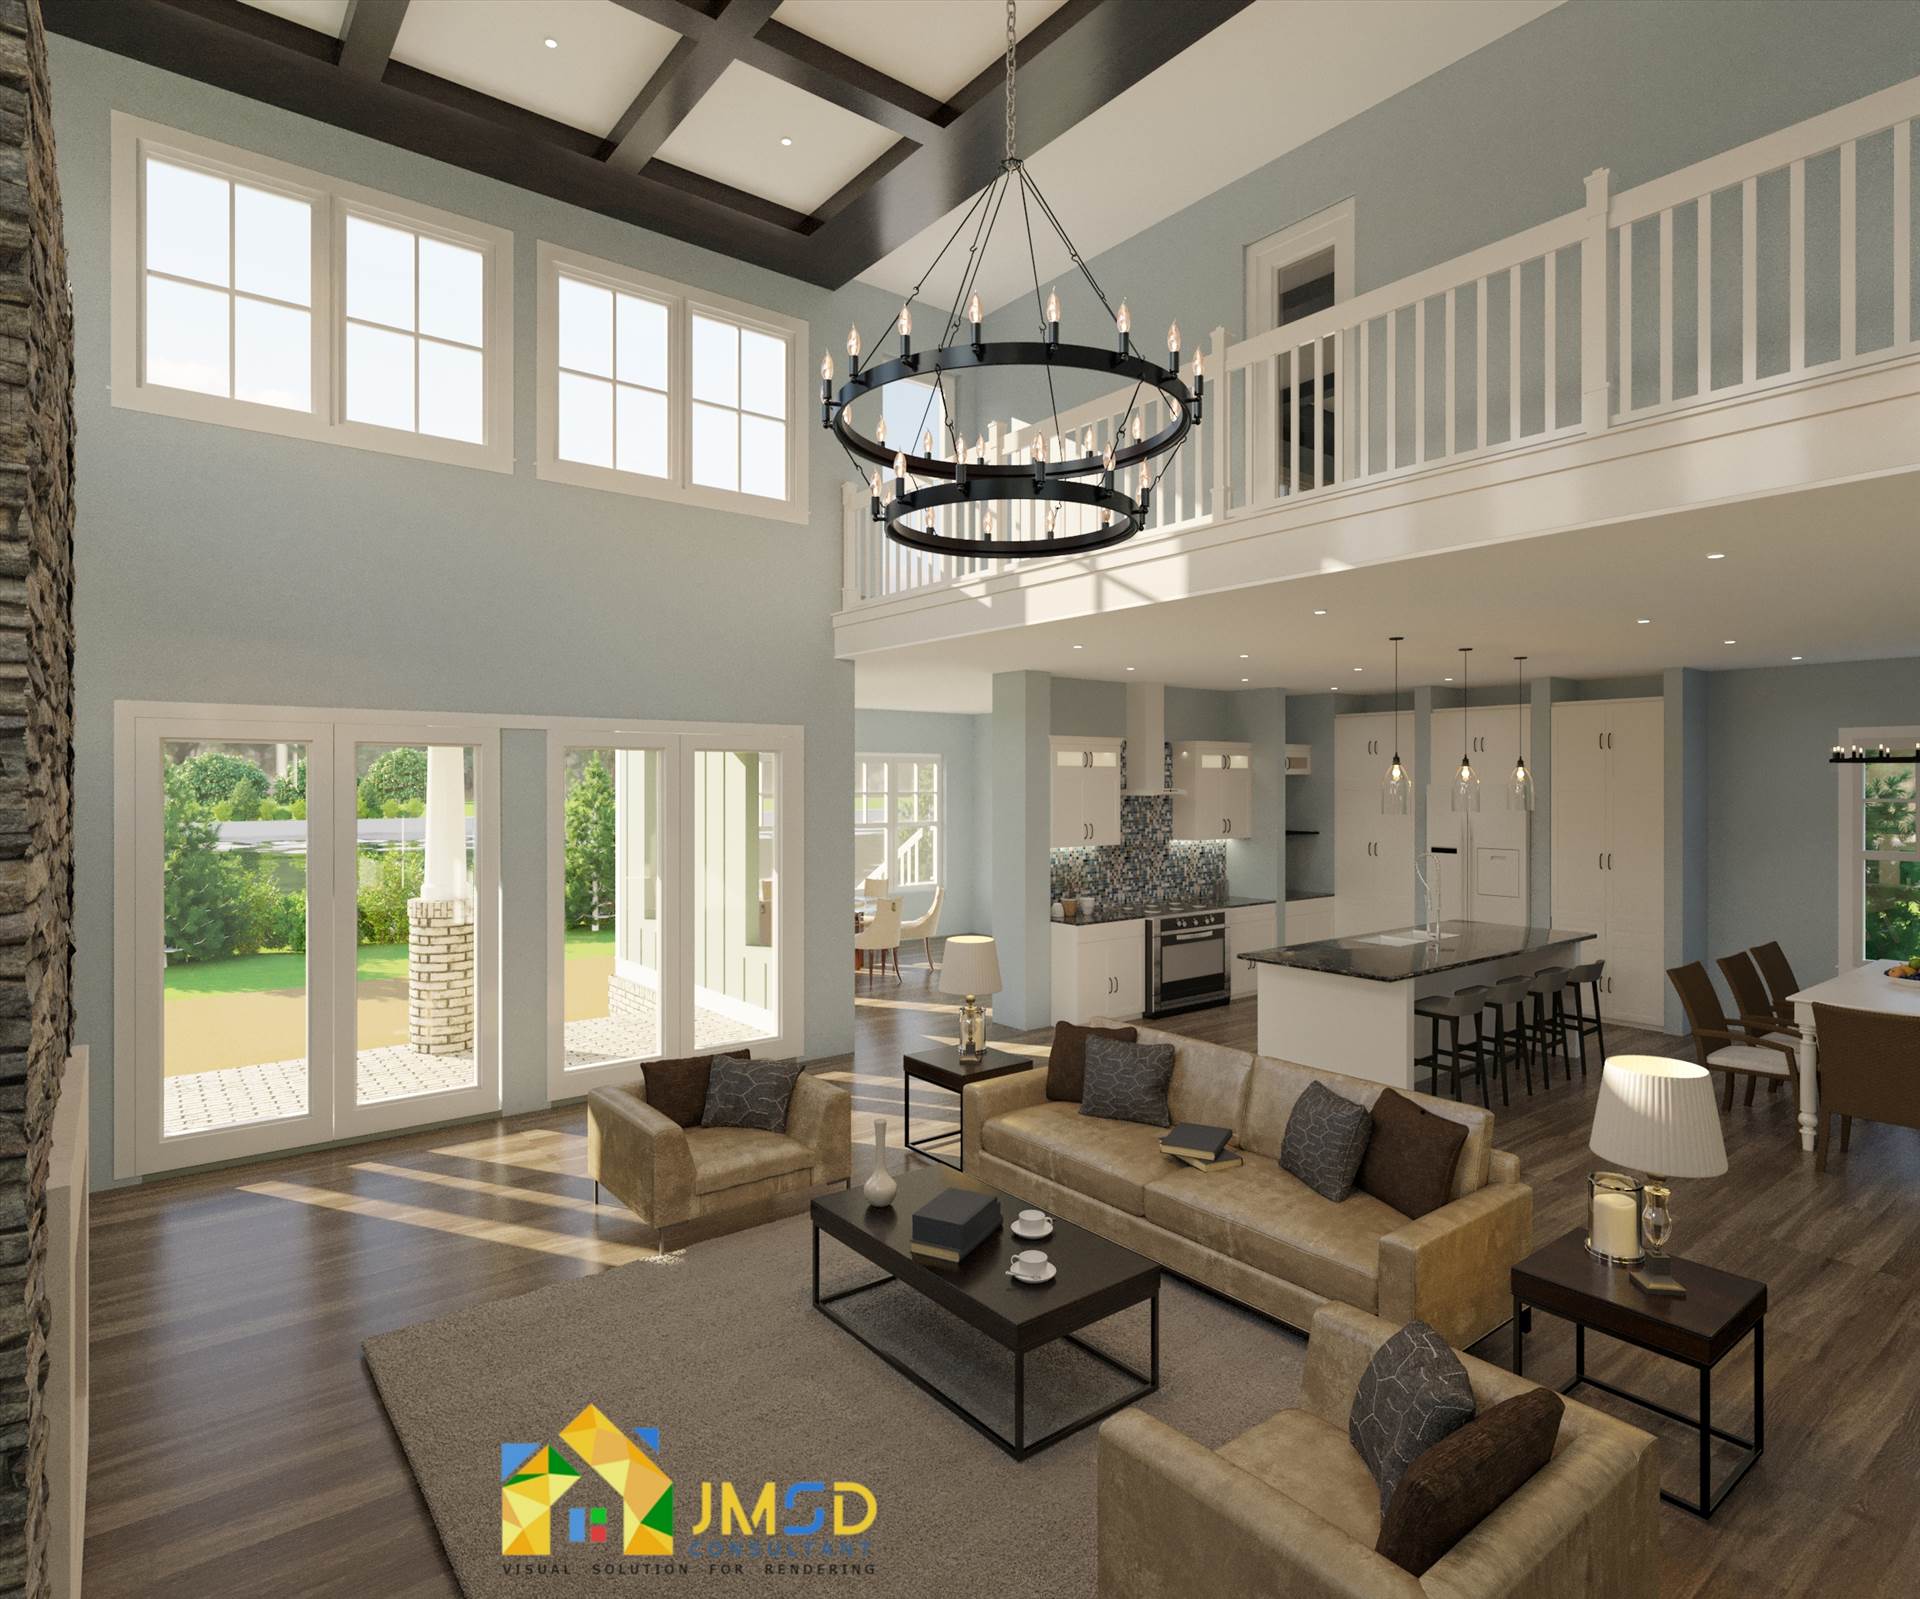 Photorealistic 3D Interior Rendering Services for Home Photorealistic 3D Interior Rendering Services are a great way of intuitive 3D Architectural Visualization of rooms, furniture elements, and decor of any proposed development. and It is also an important planning tool for designers. by JMSDCONSULTANT